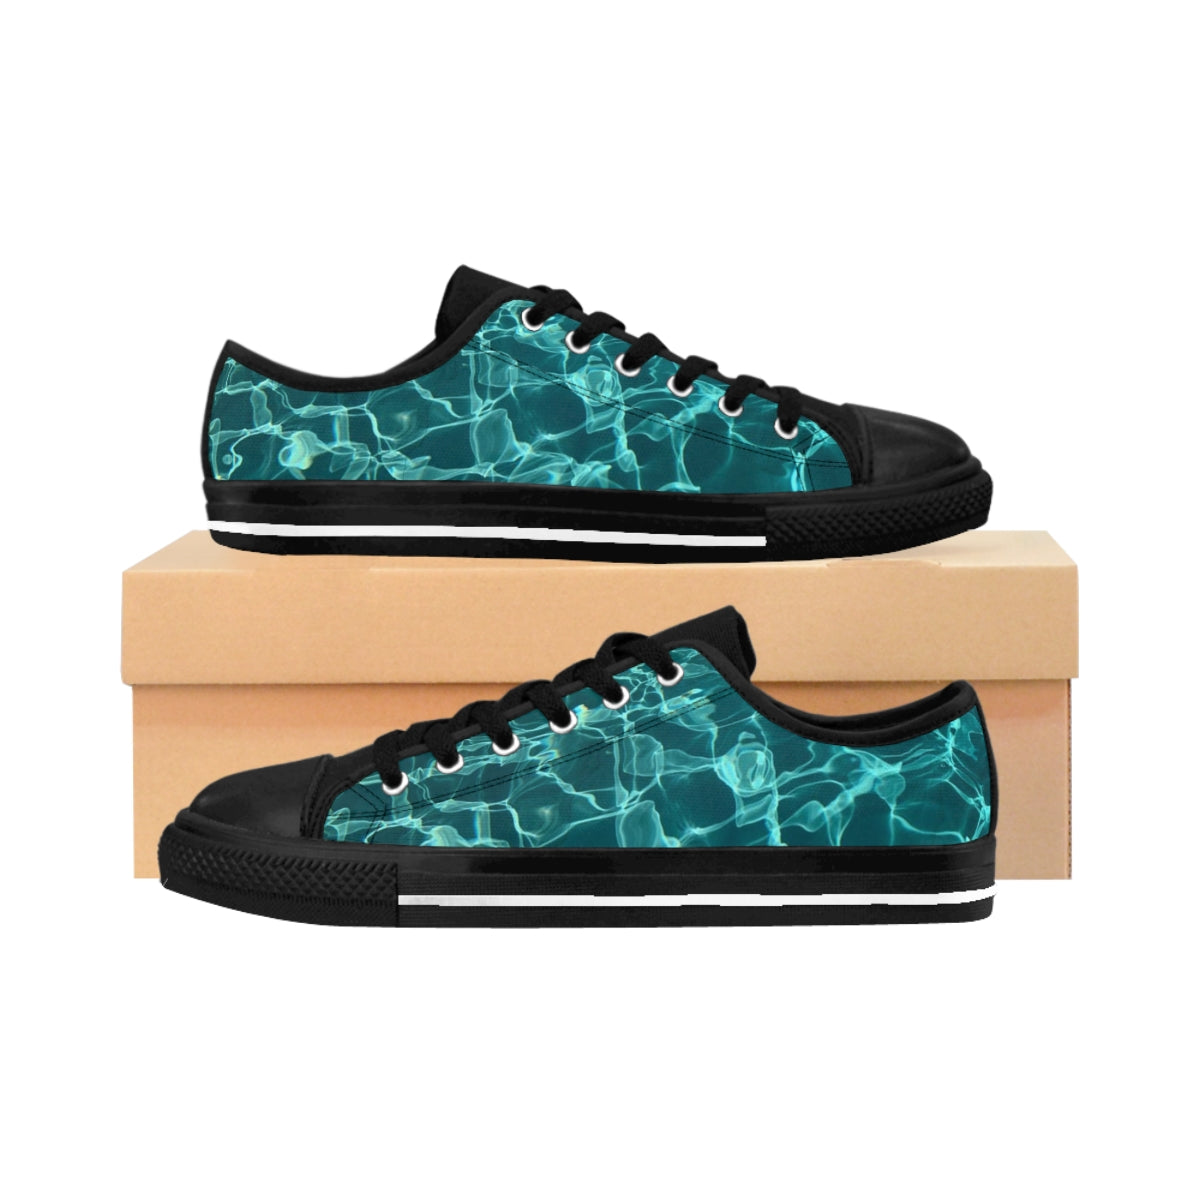 Women's Sneakers Turquoise color design